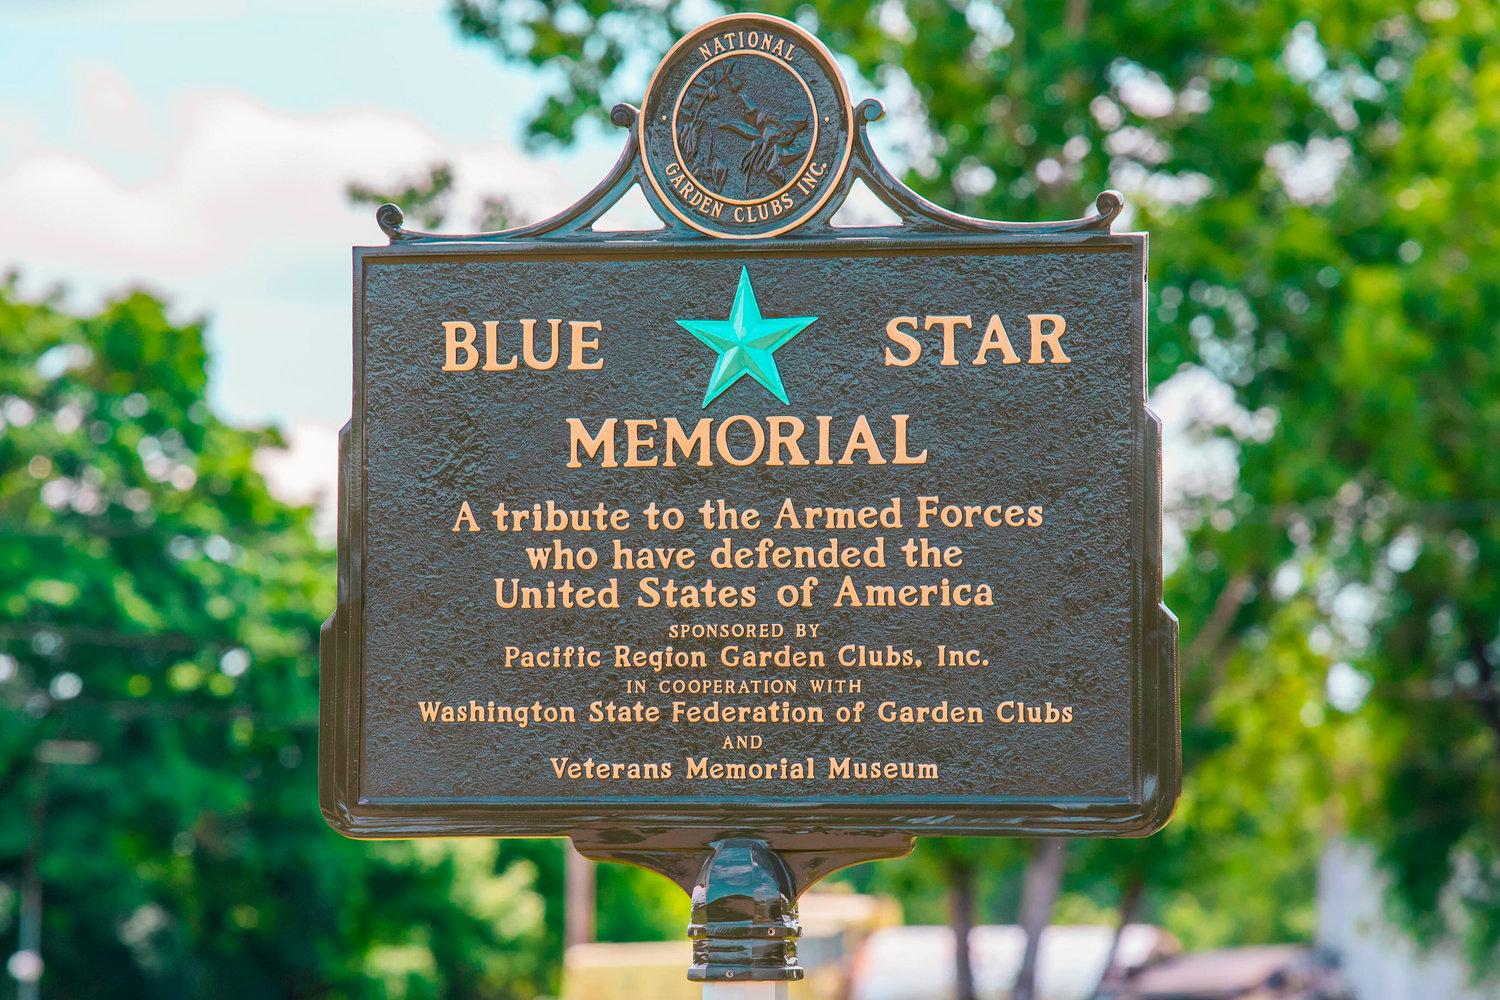 The Blue Star Memorial was set up outside the Veterans Memorial Museum recently as a tribute to the U.S. armed forces.